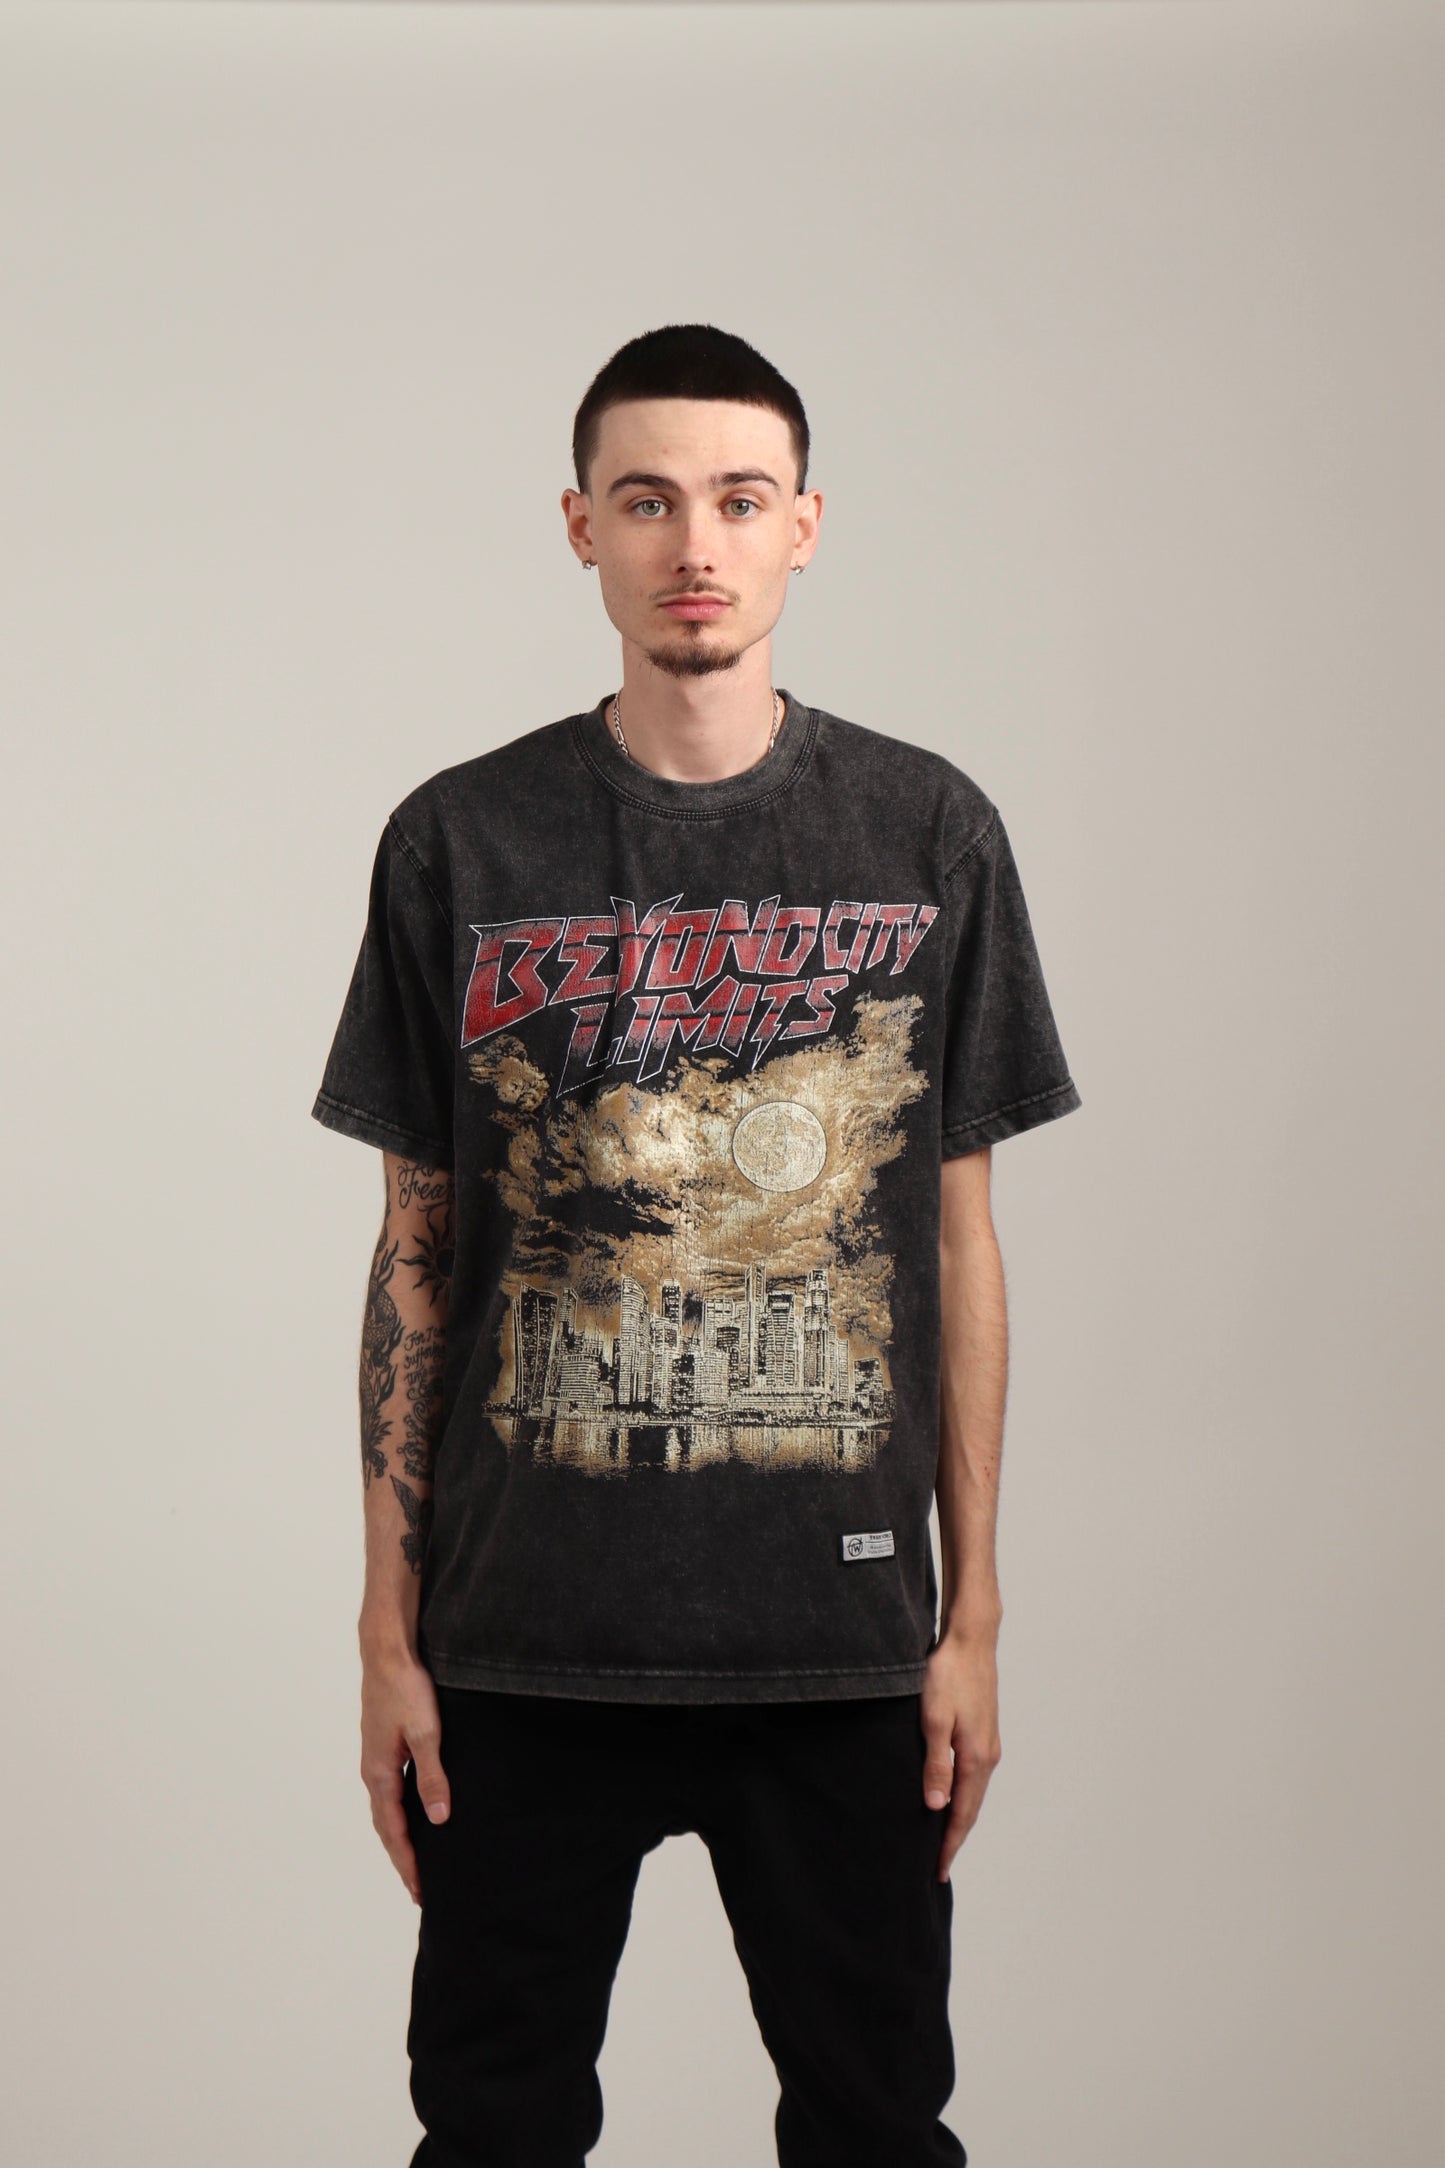 "Beyond City Limits” Graphic Tee